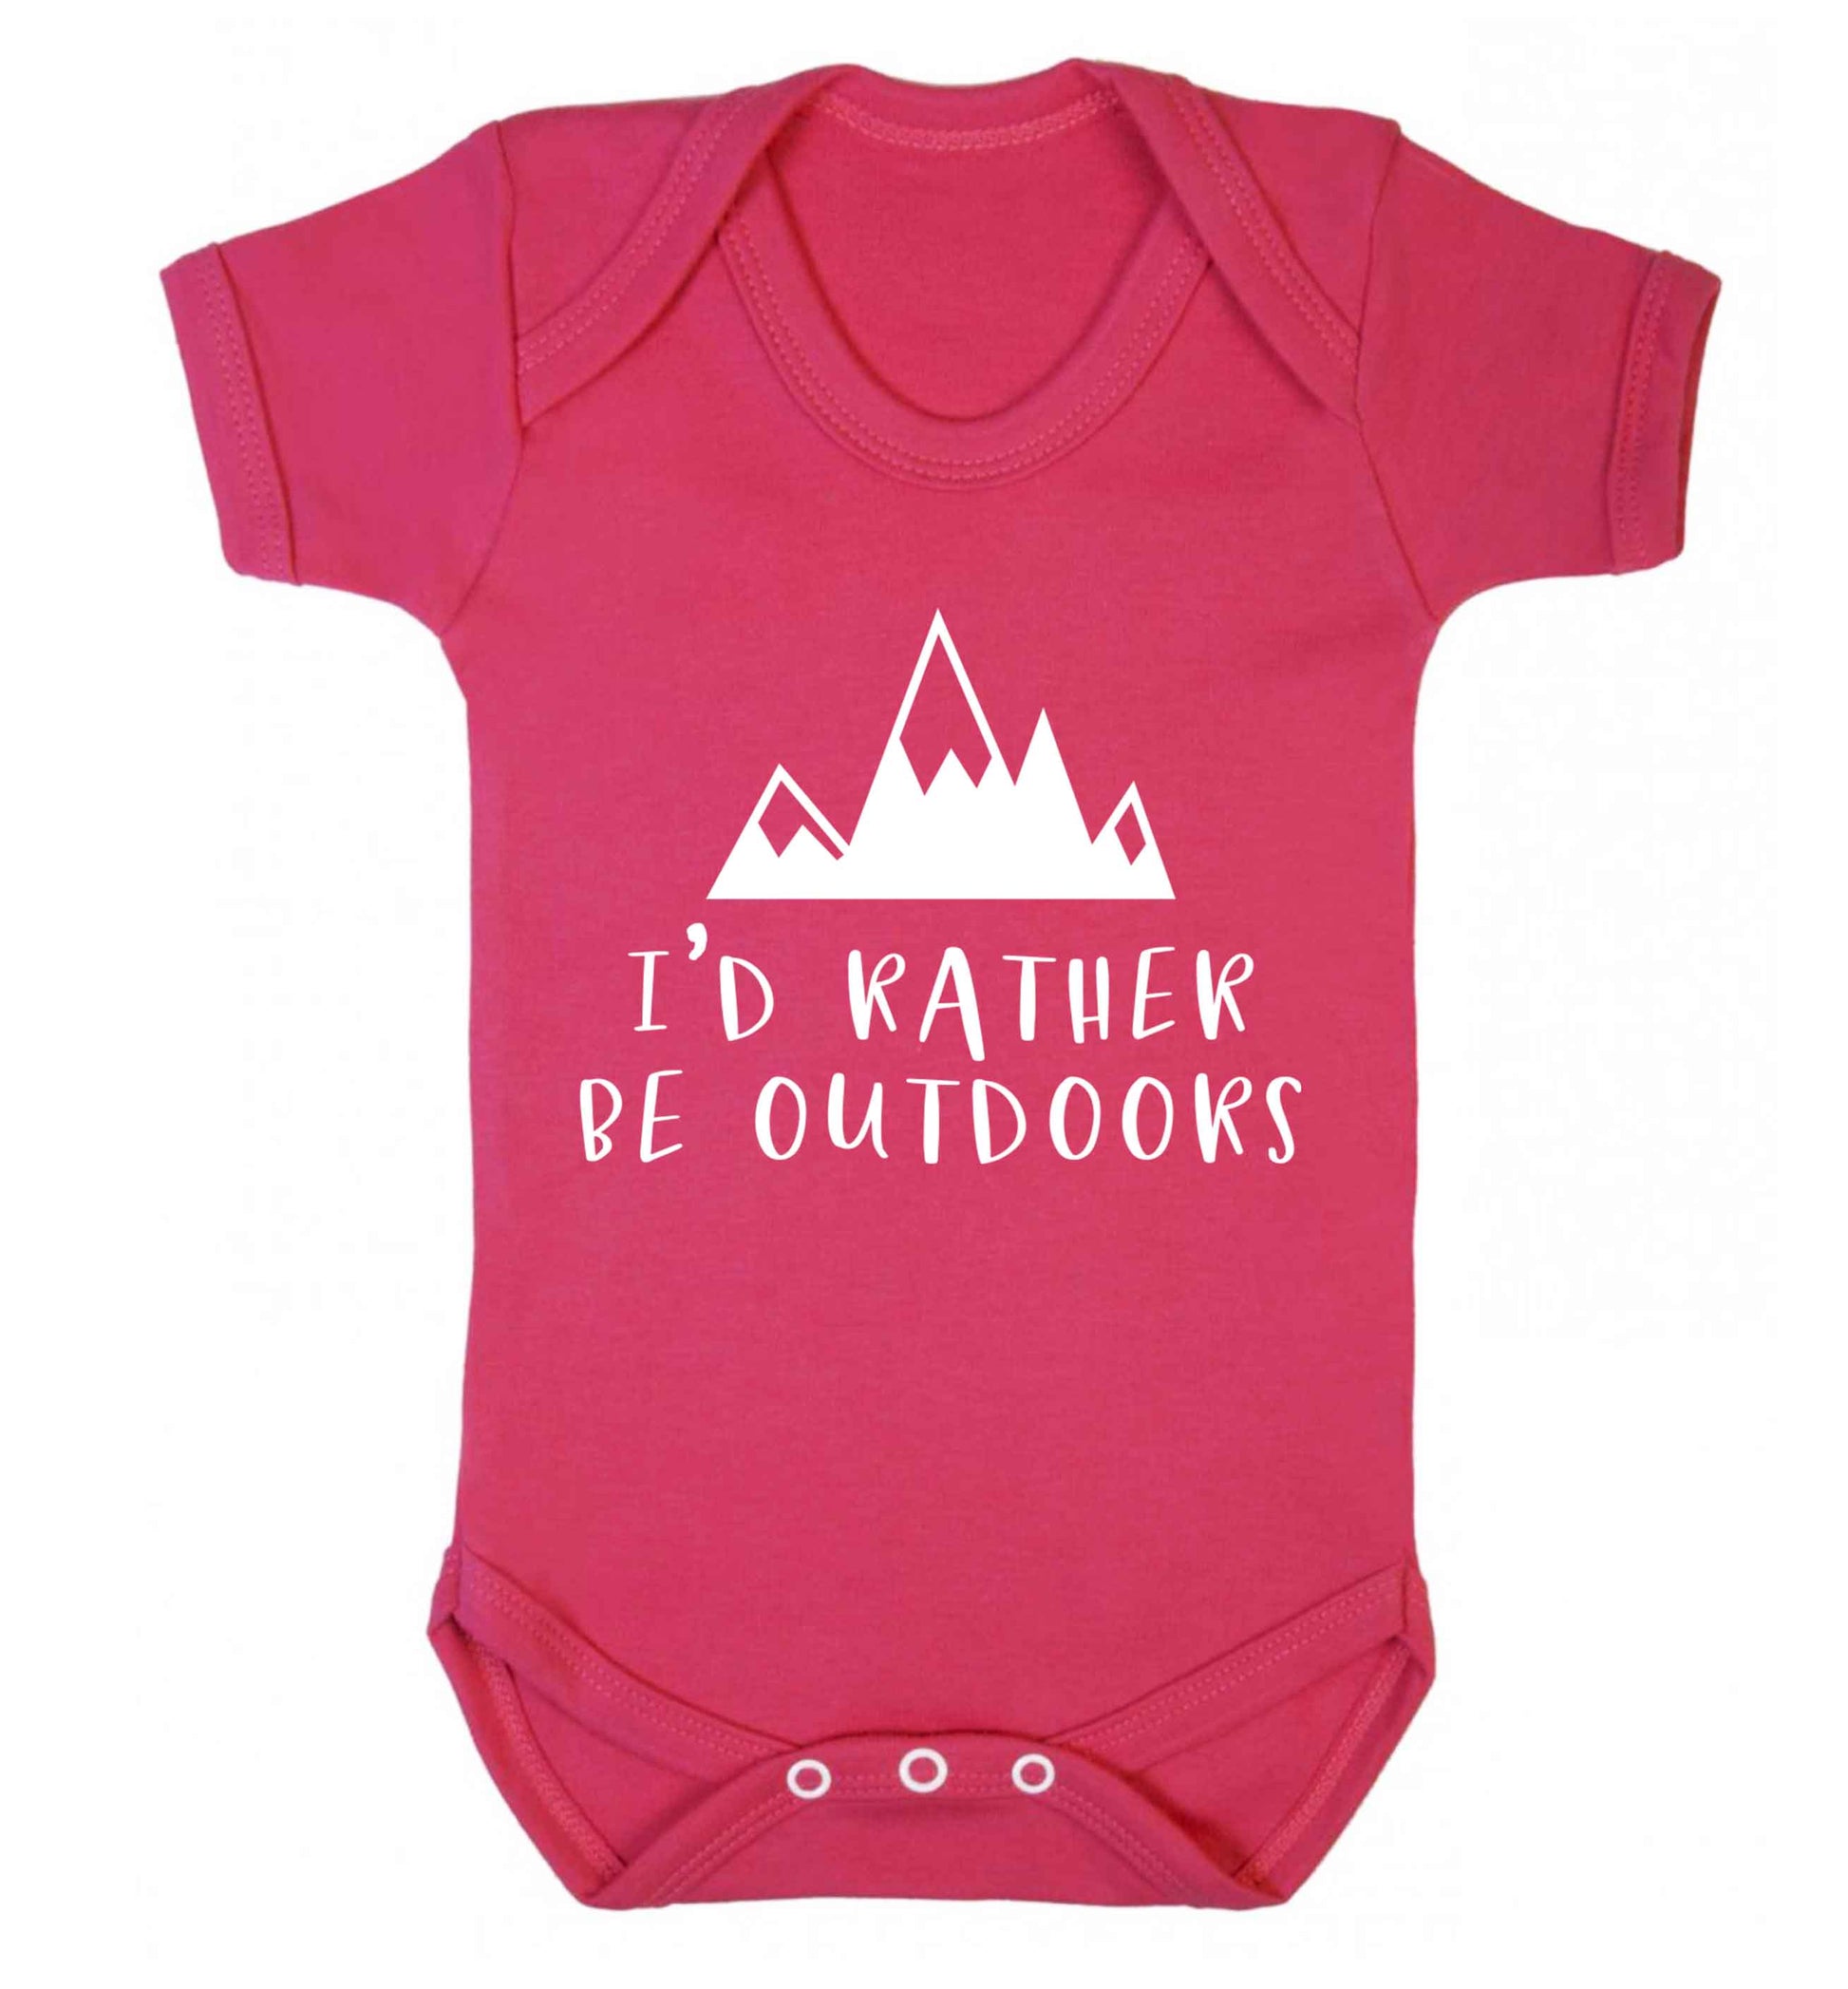 I'd rather be outdoors Baby Vest dark pink 18-24 months